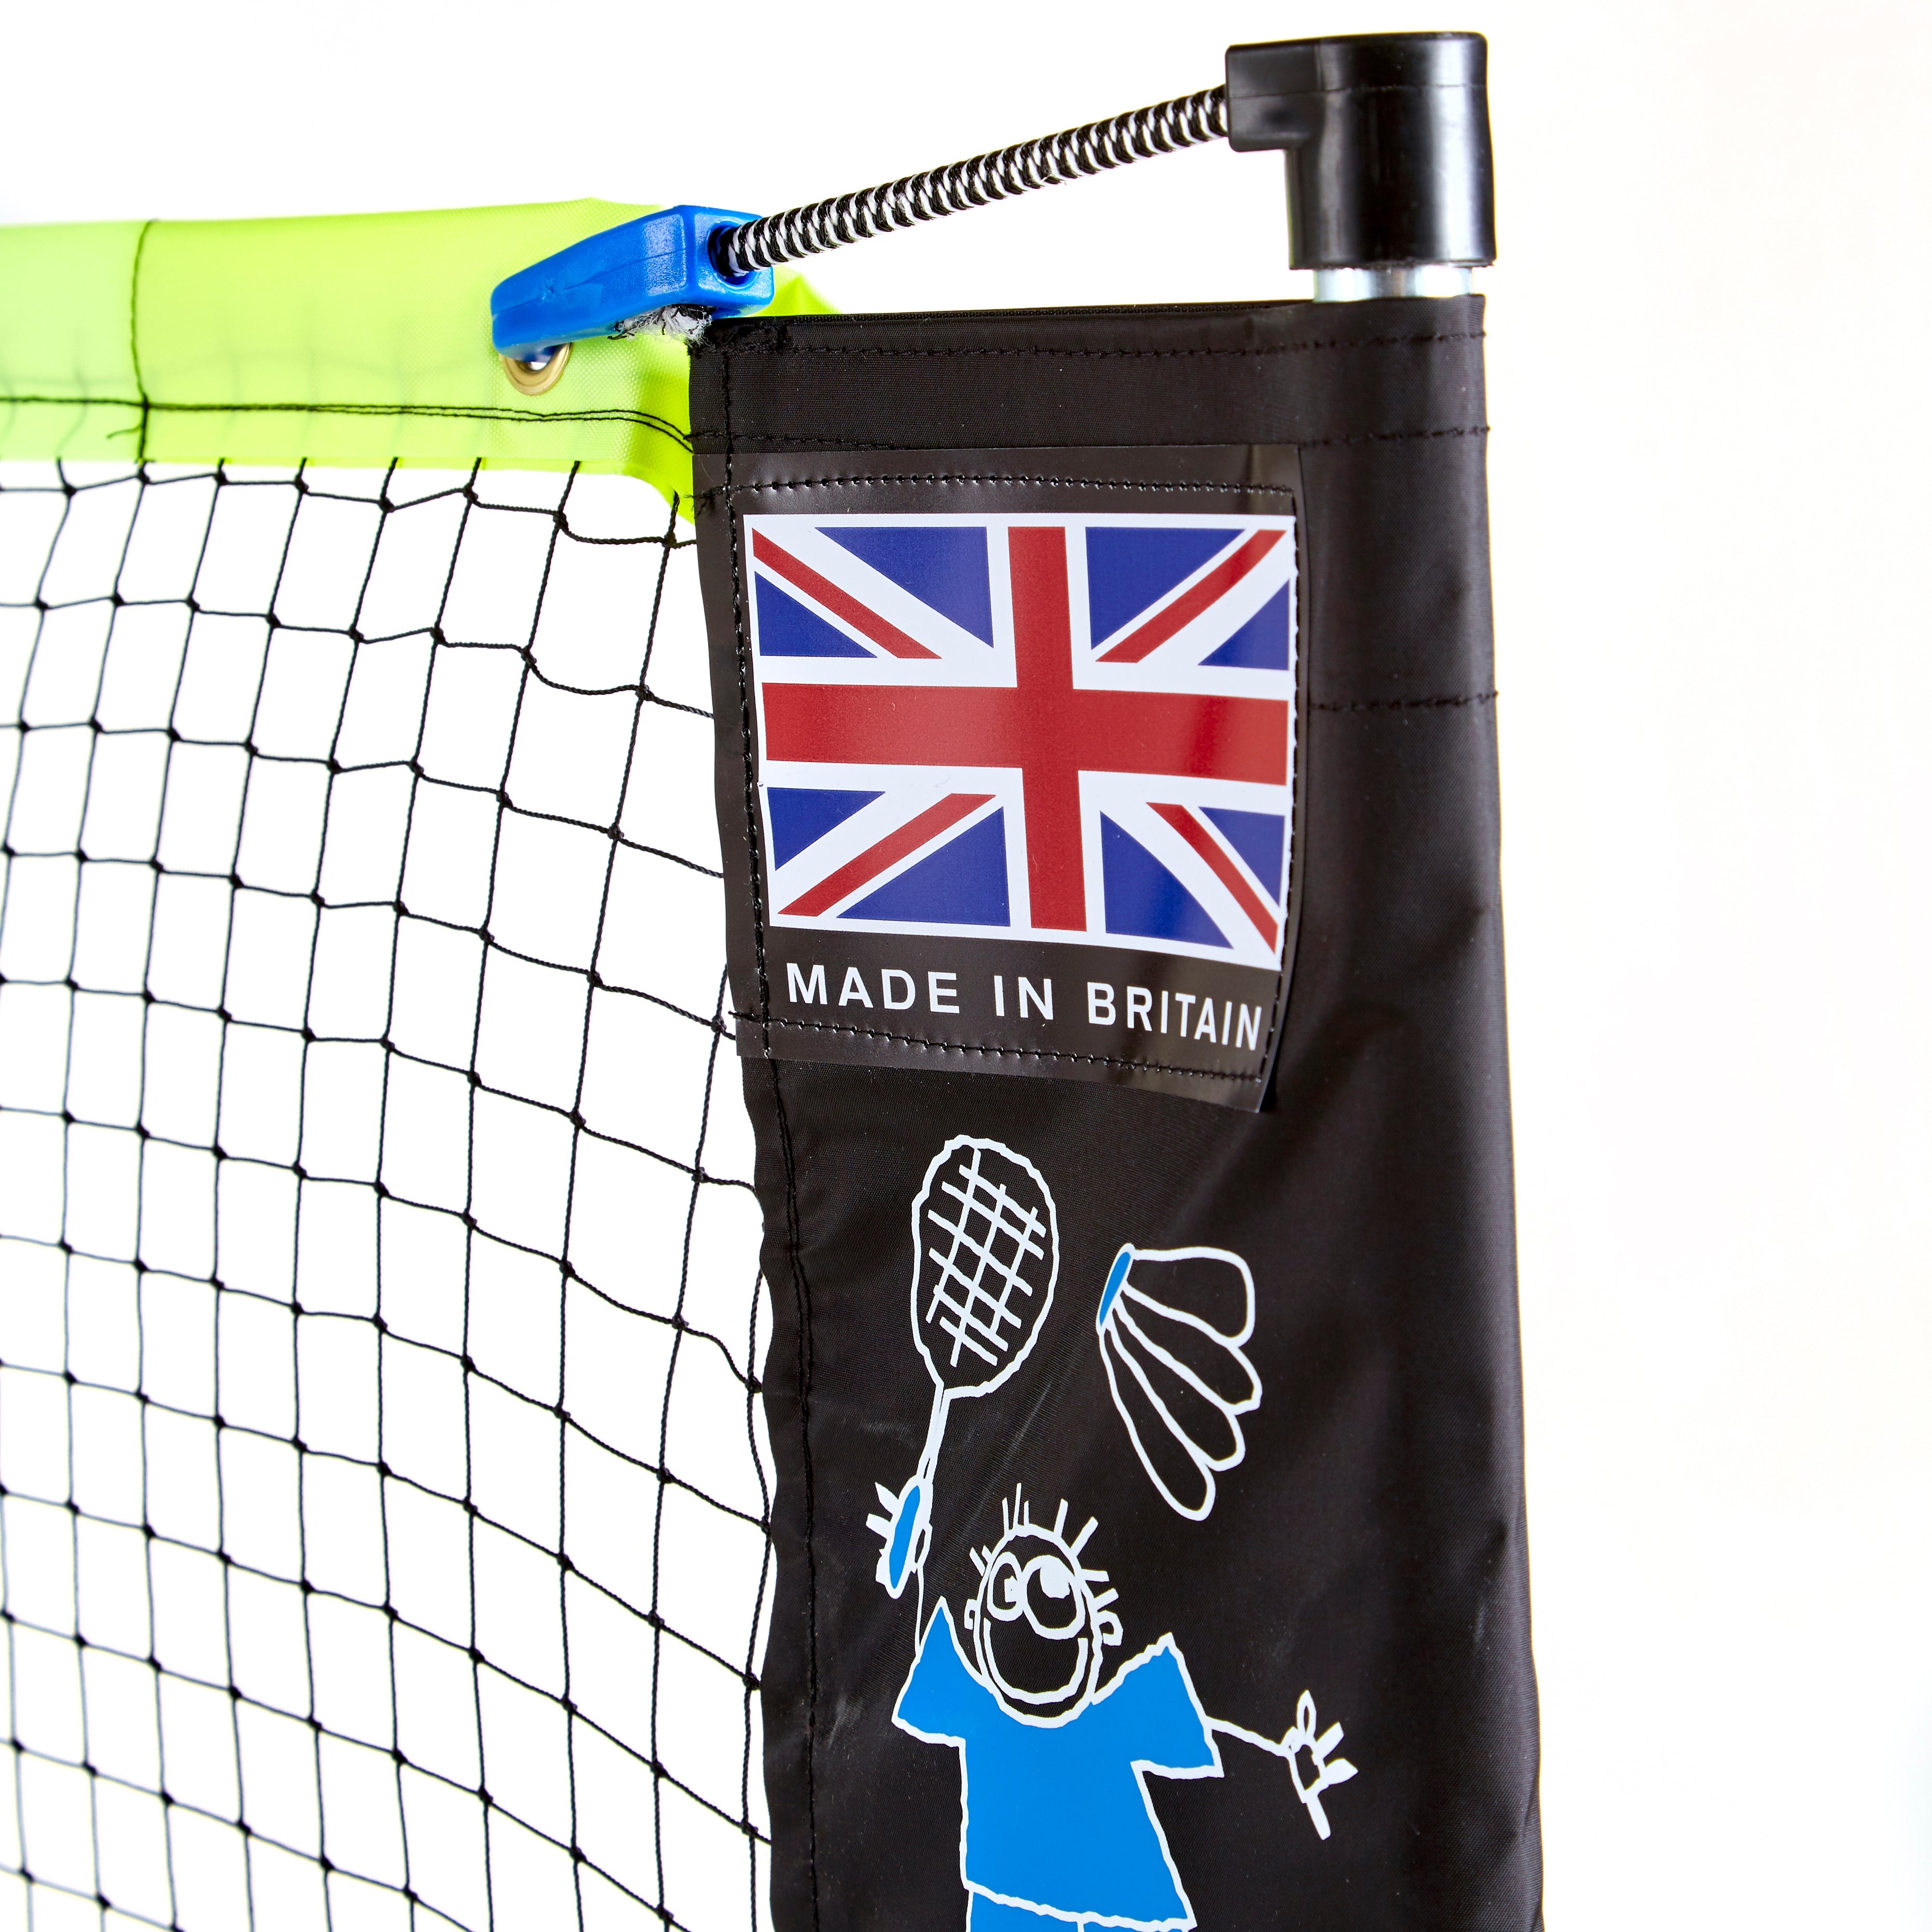 Badminton clip and bungee tensioning system, and Zsig's Made in Britain flag